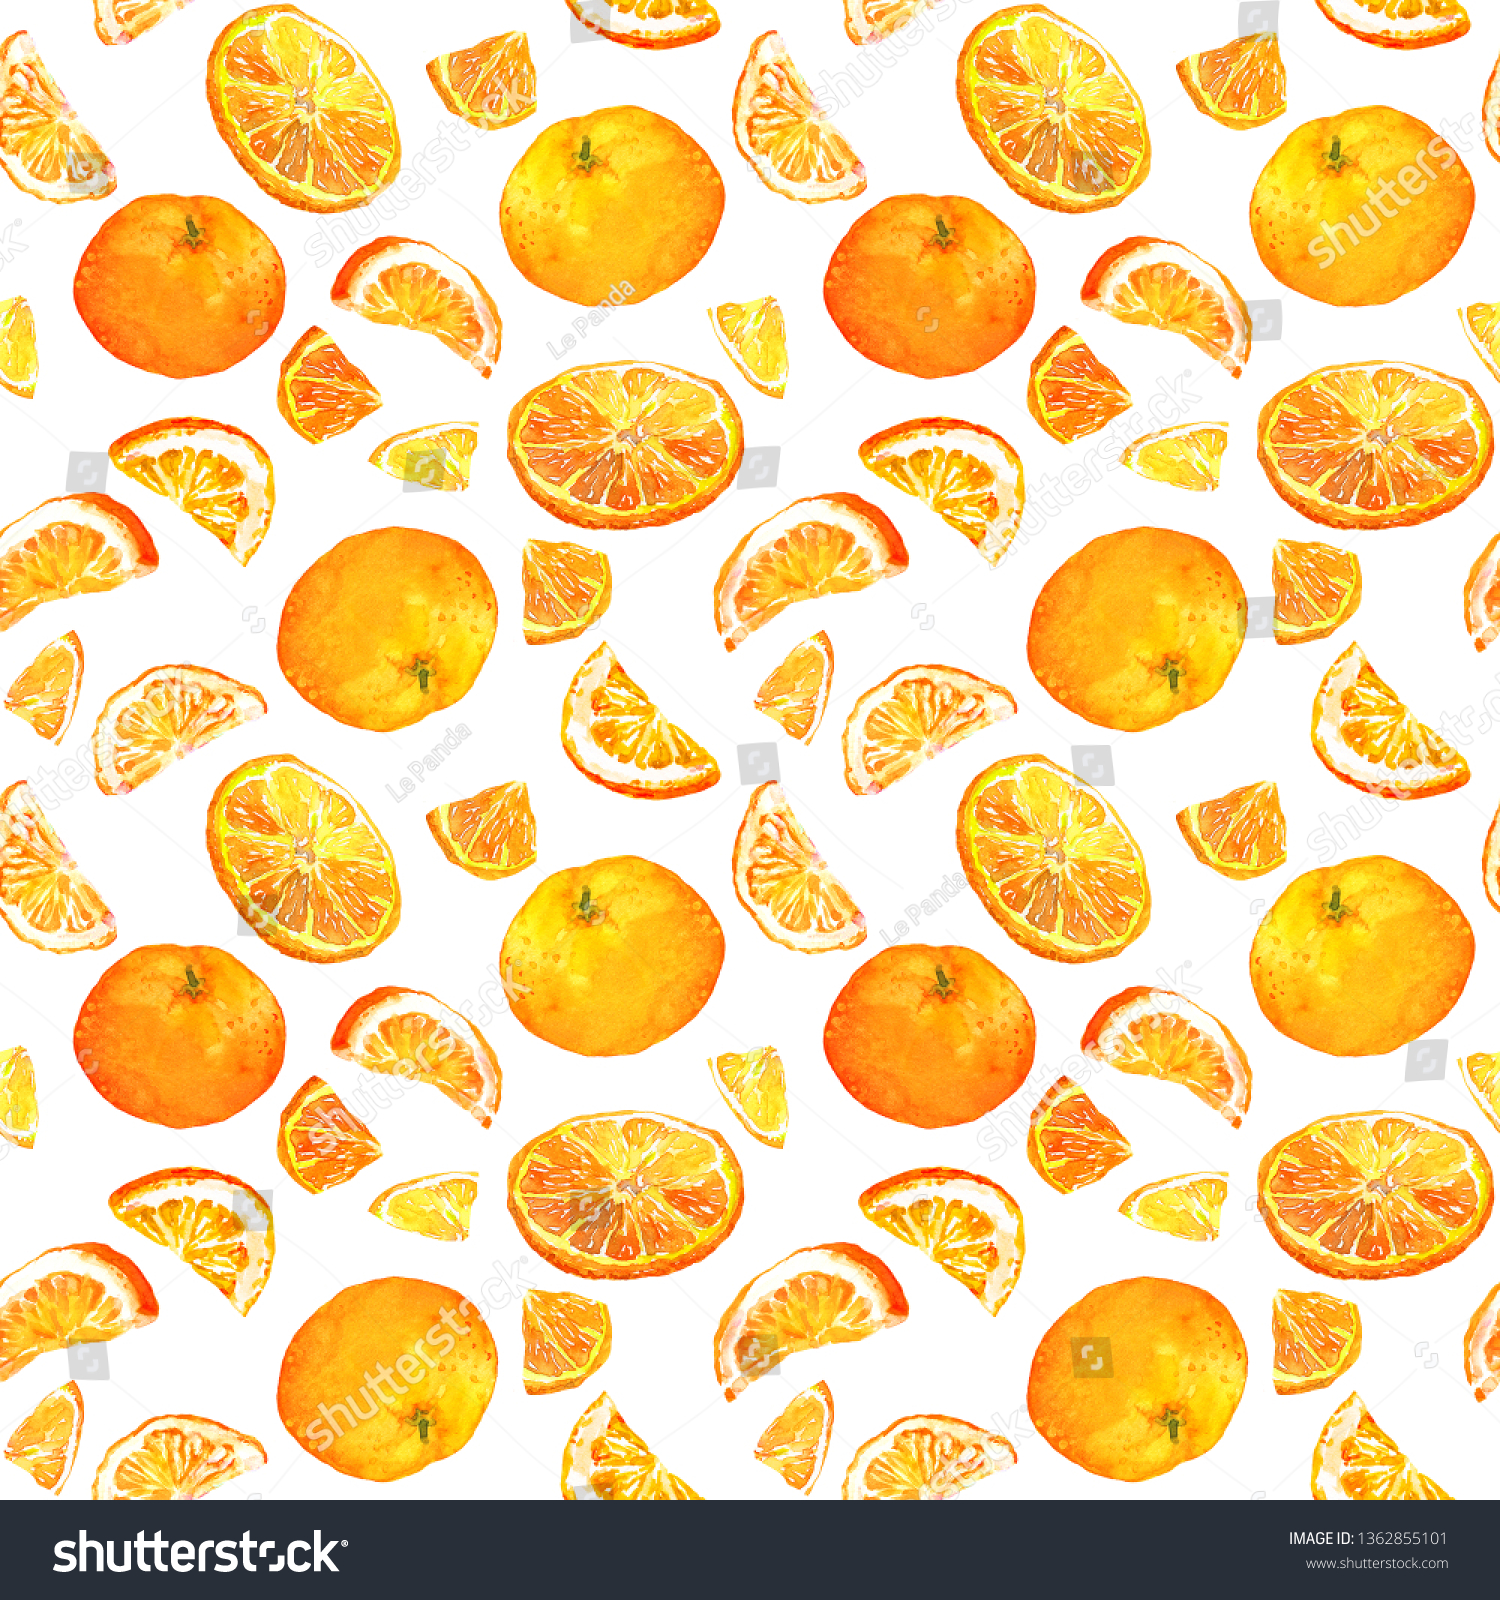 Bright pattern with oranges - whole and slices. Seamless pattern. Watercolor on white background #1362855101